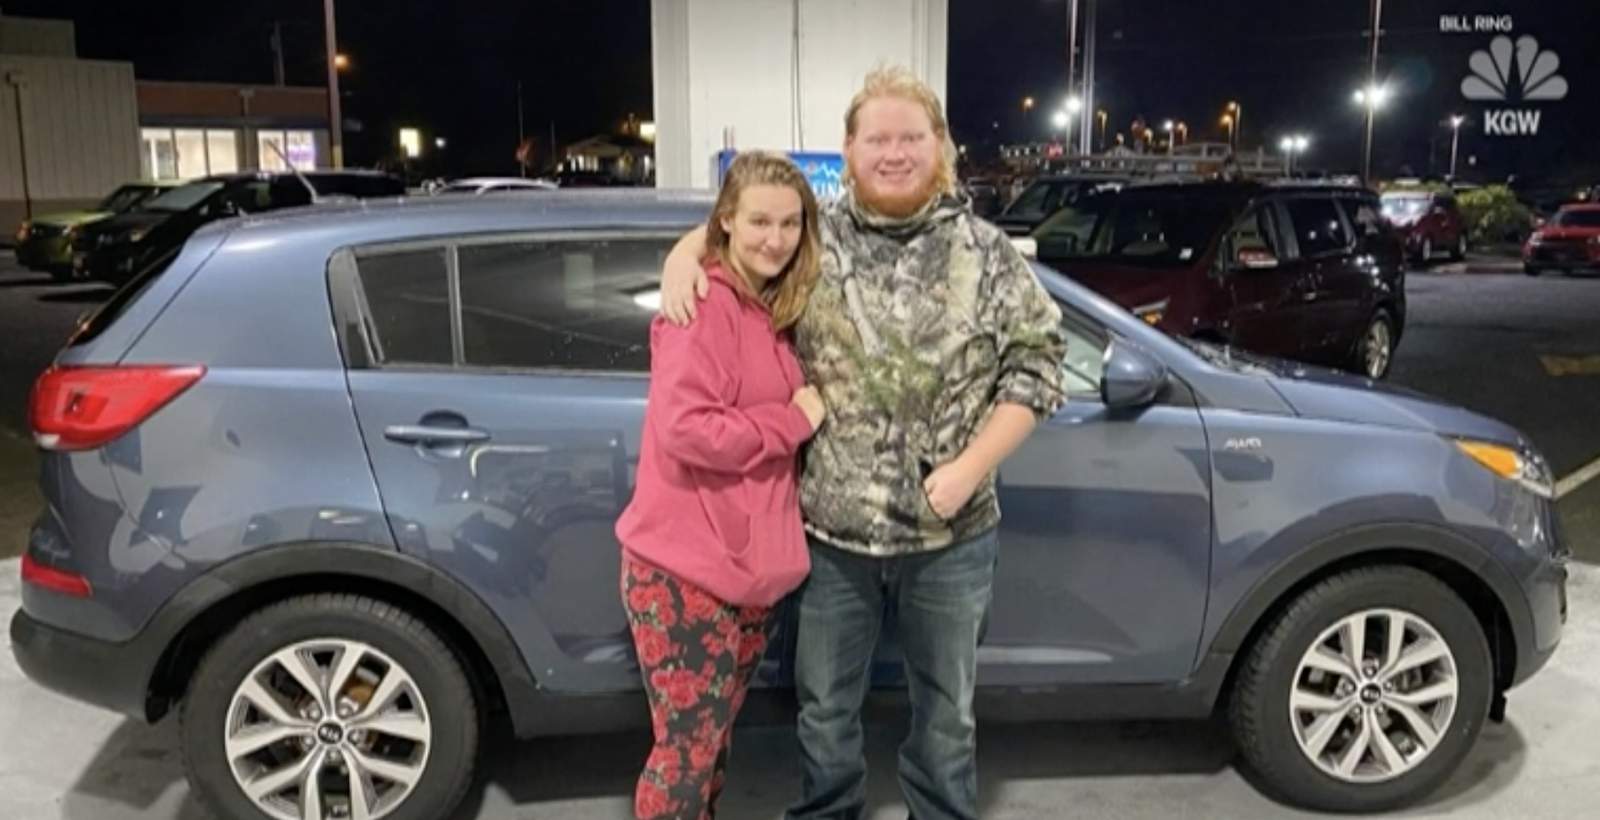 Generous gift: Anonymous stranger buys car for gas station attendant